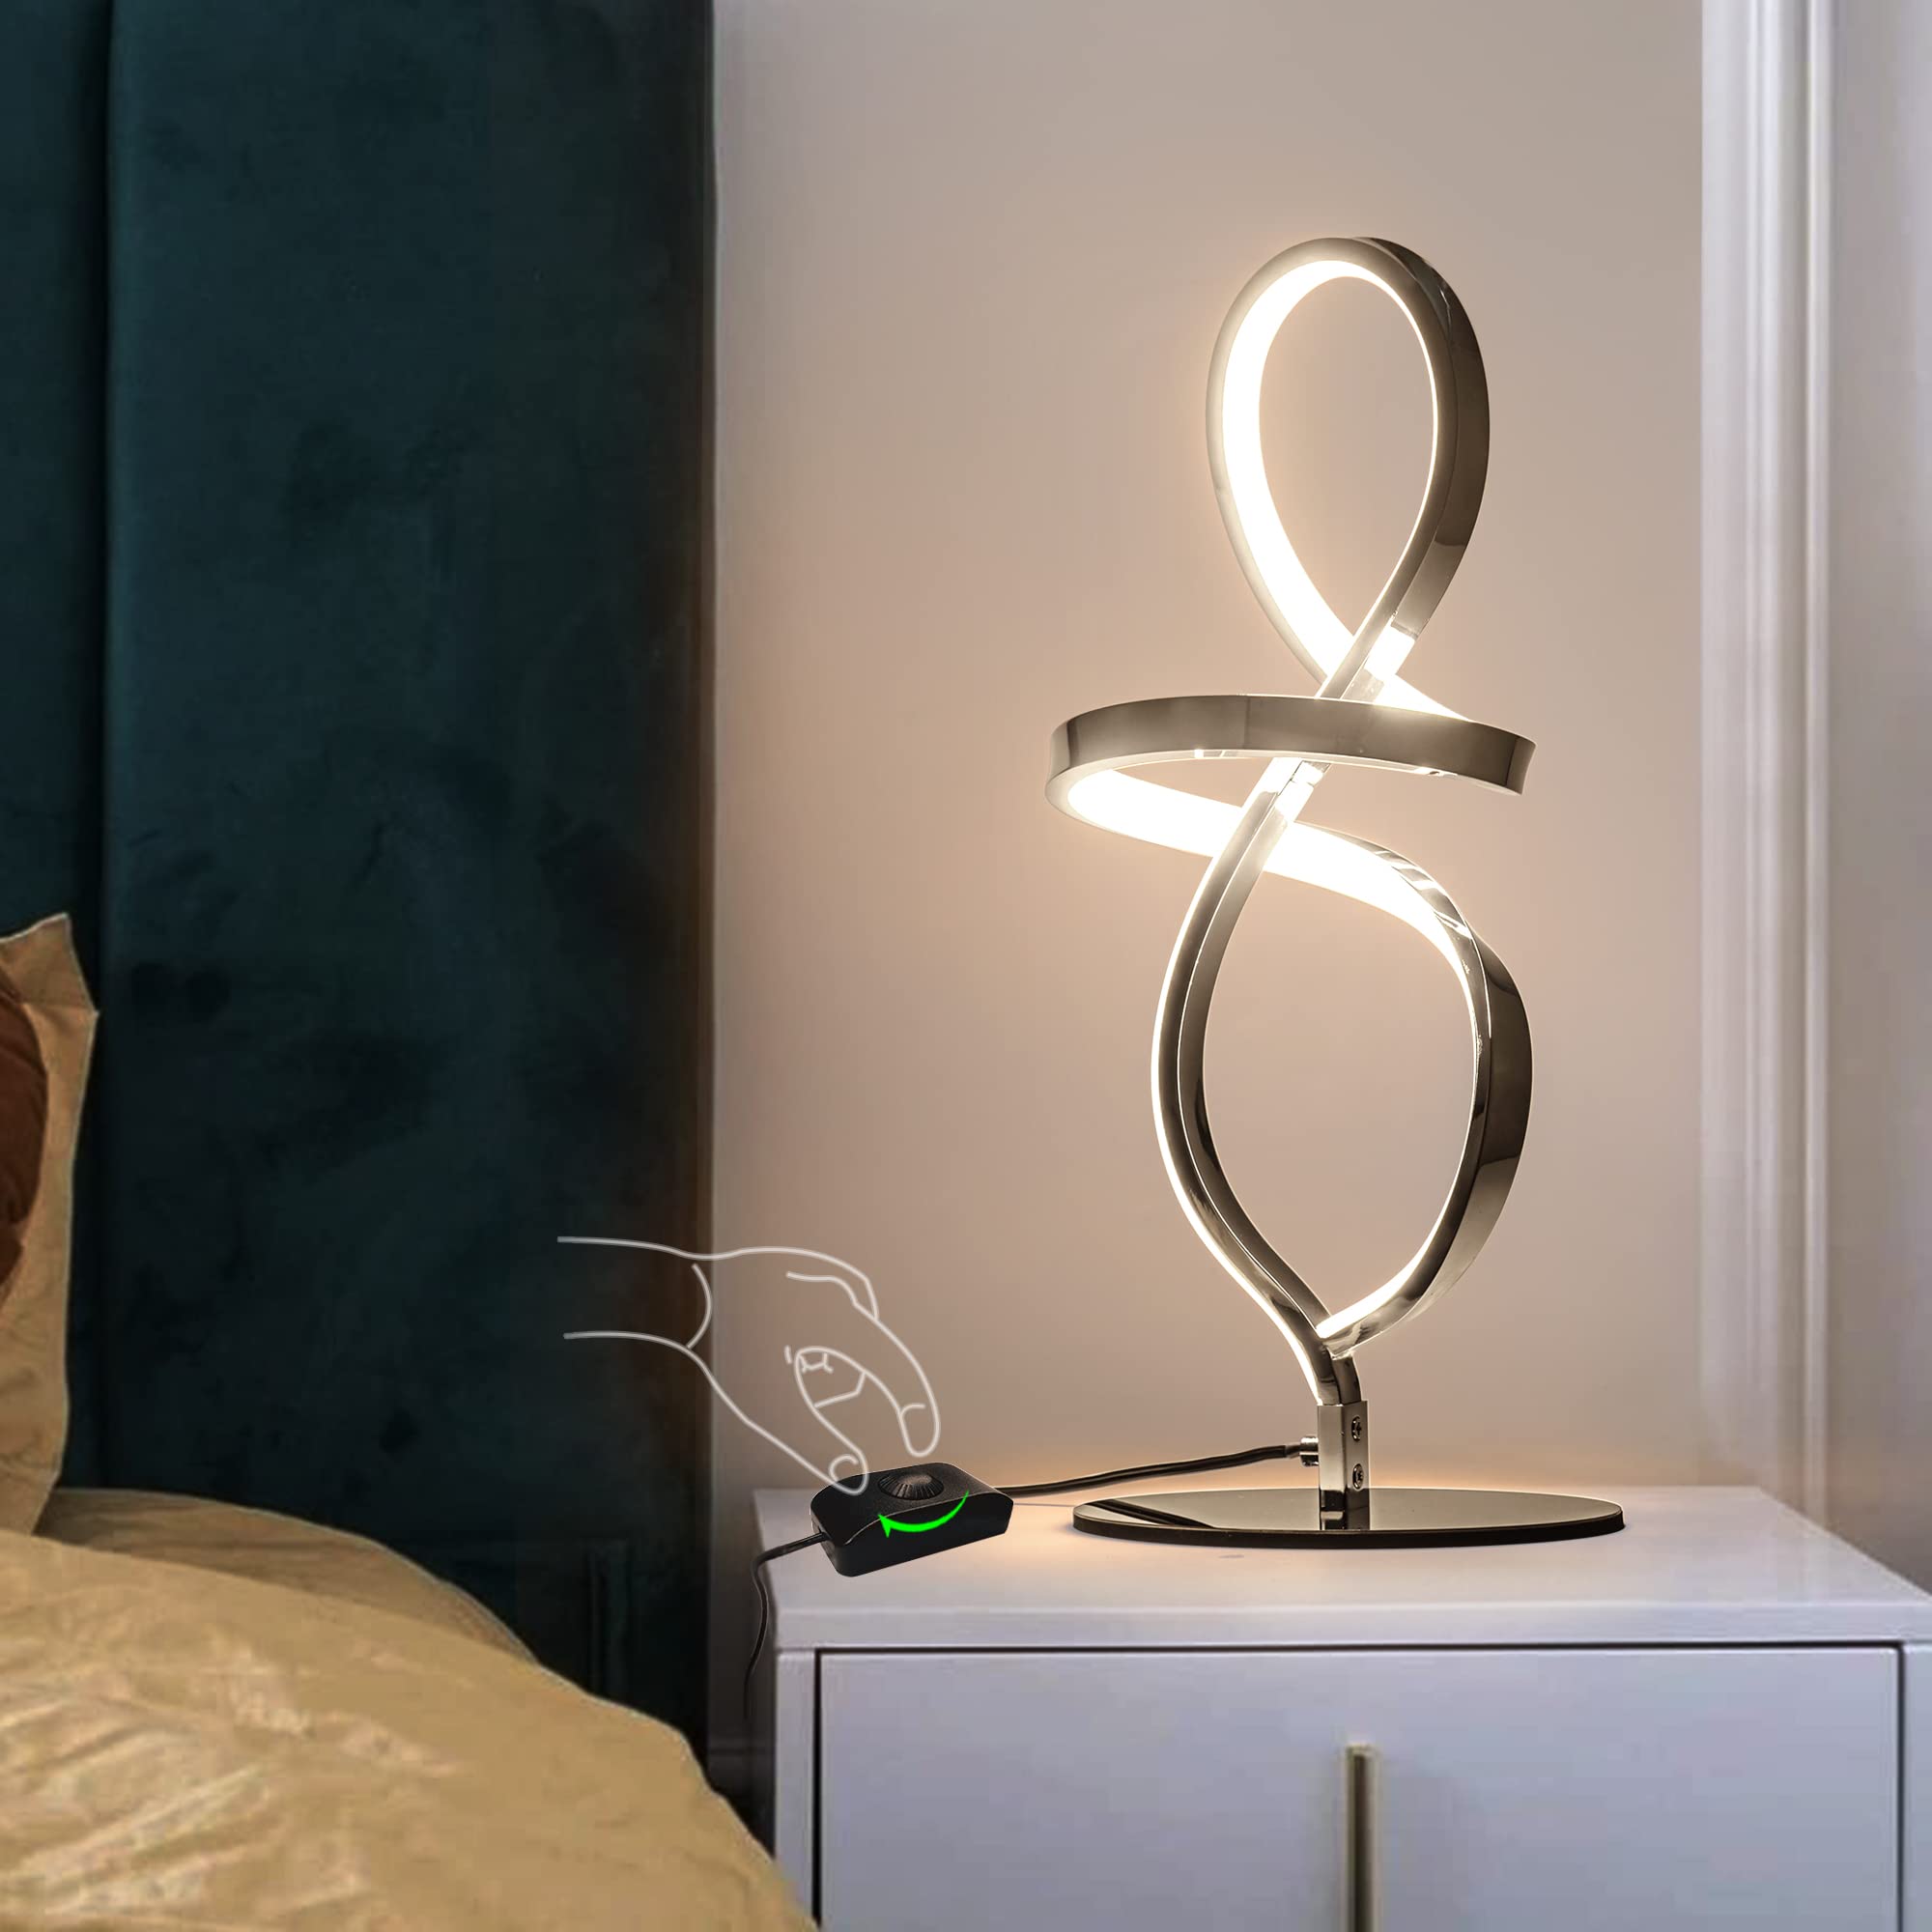 Mayful Modern Table Lamp, LED Spiral Lamp, Stepless Dimmable Bedside Lamp, Contemporary Nightstand Lamp, Chrome Desk Lamp for Bedroom Living Room Home Office, 12W, 3200K Warm White